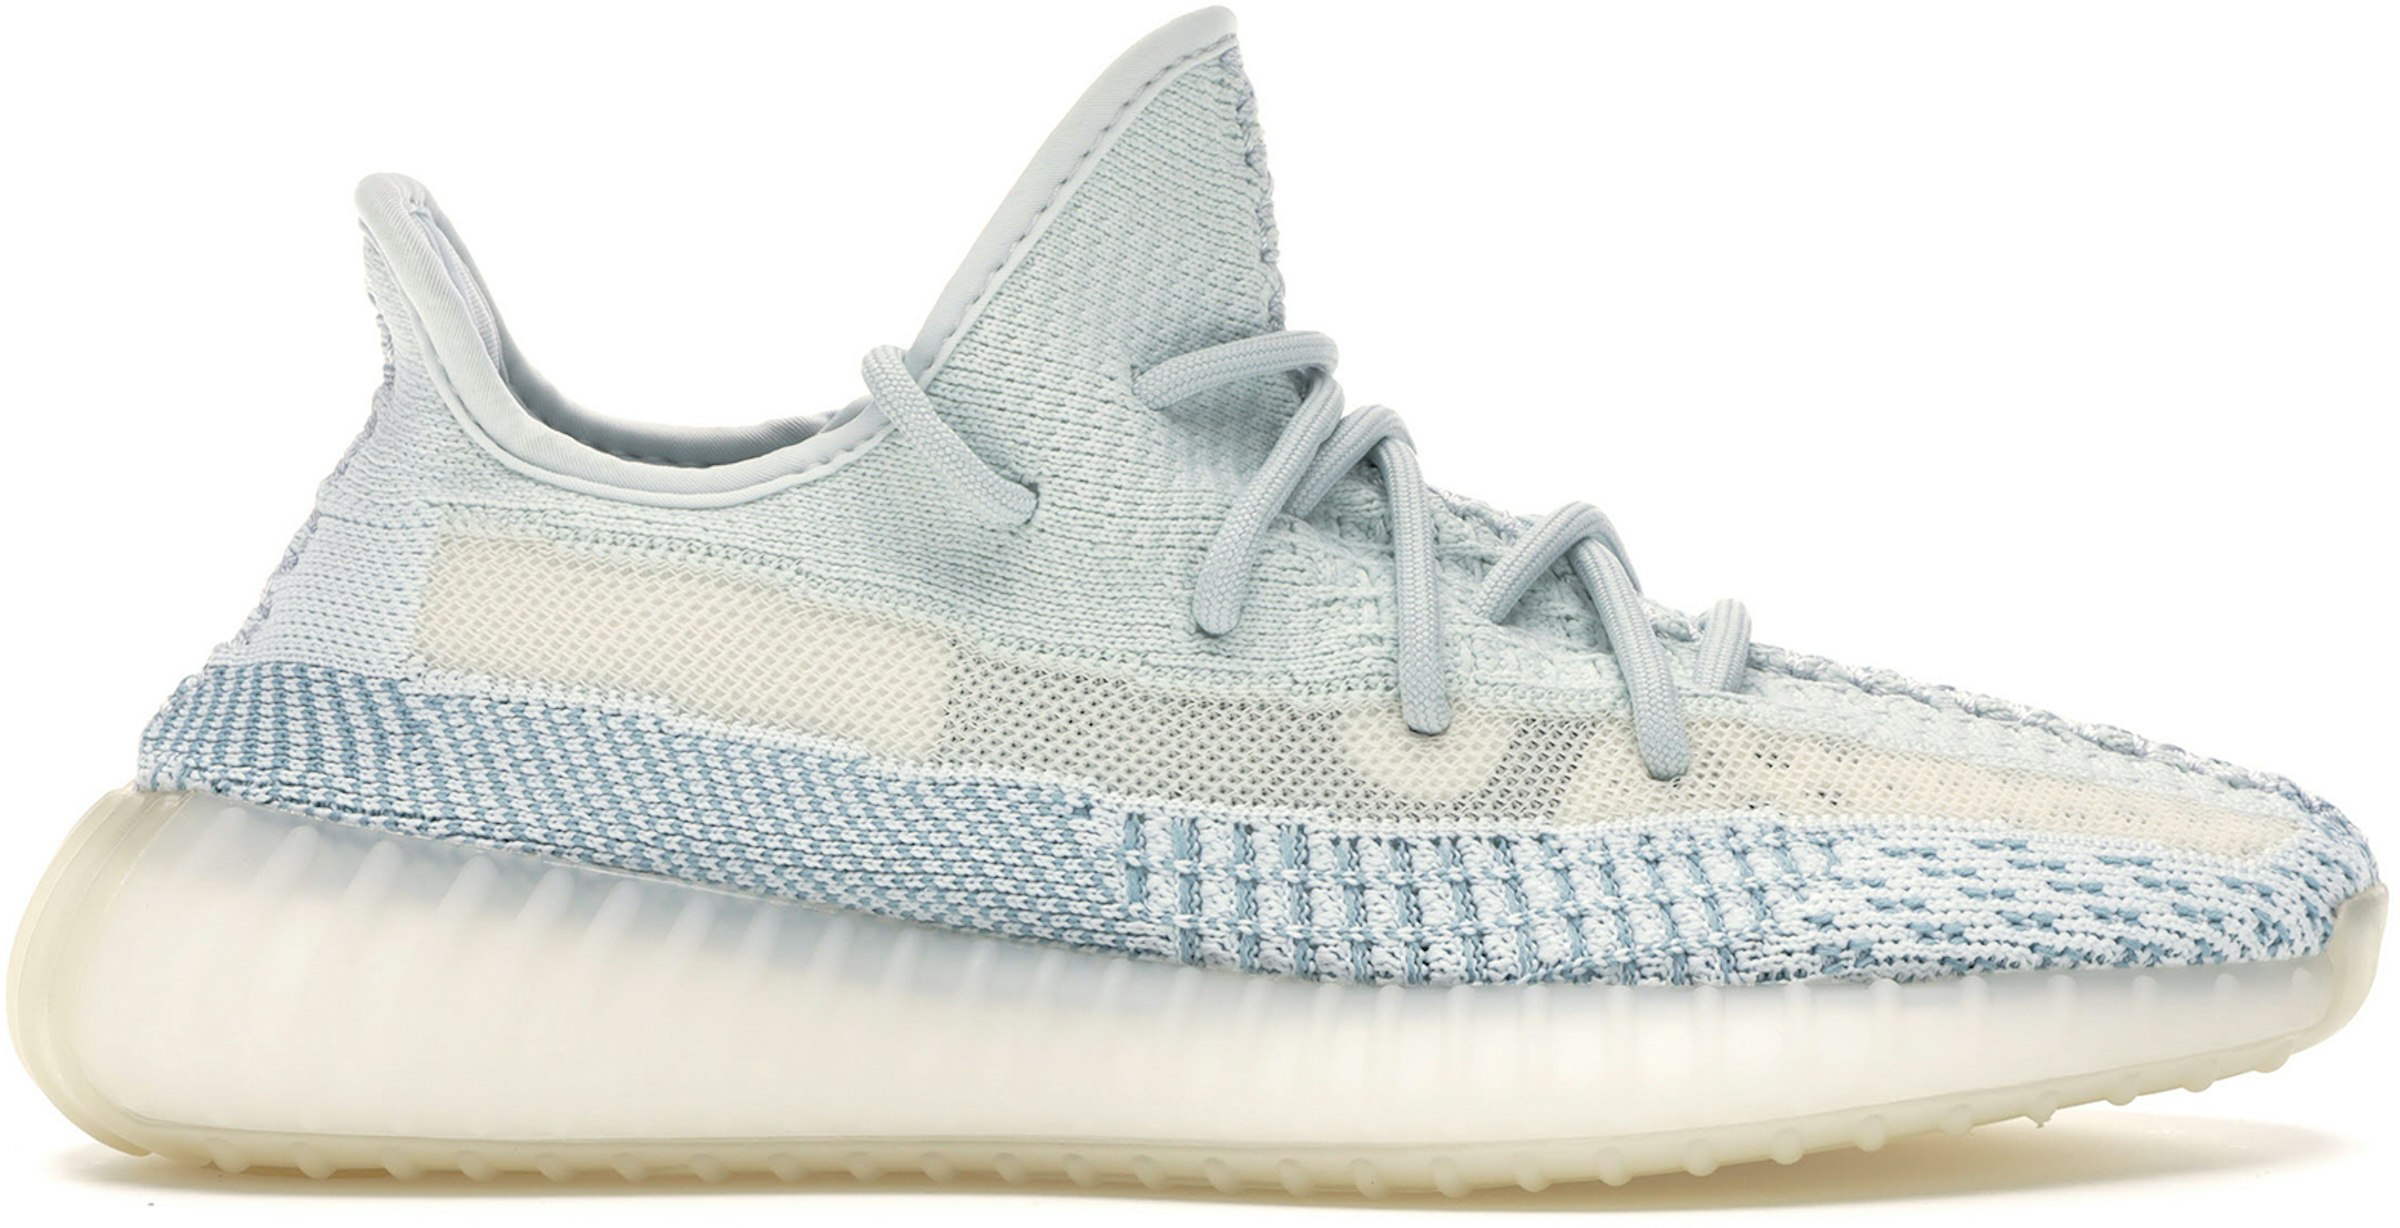 adidas Yeezy Boost 350 V2 Cloud White (Non-Reflective) Men's - - US